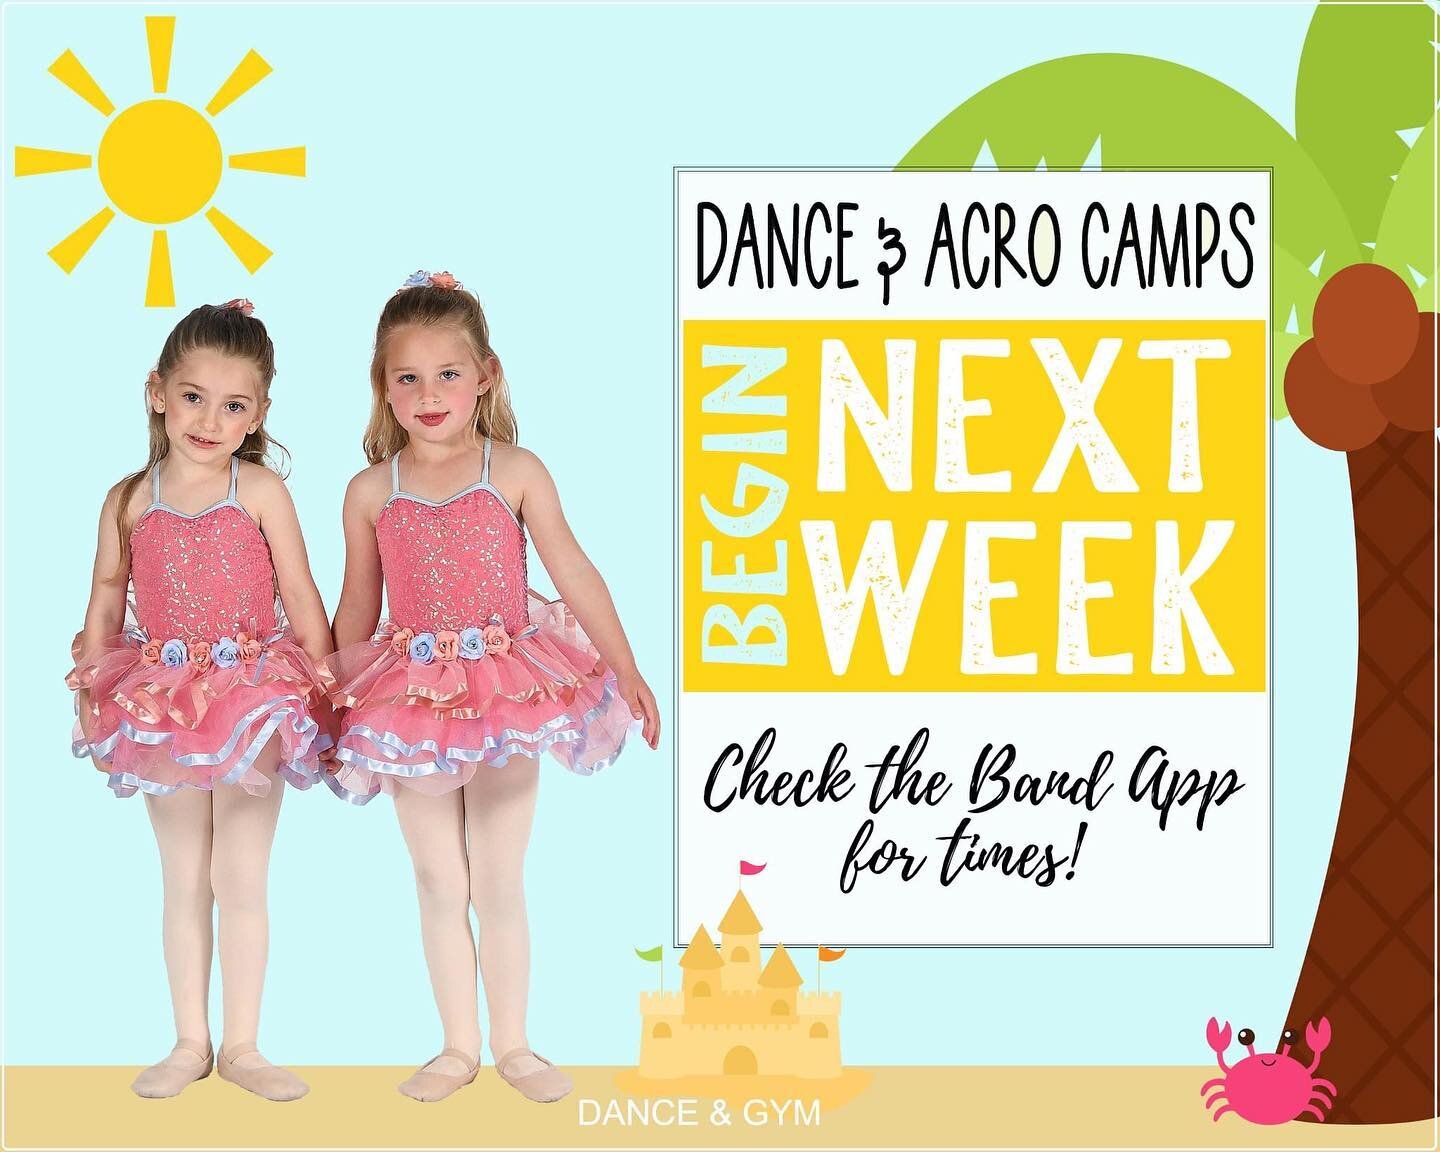 ✨REMINDER!!!✨ Summer Dance &amp; Acro Camps begin next week!  Check the Band App for times &amp; details!  We can't wait to see everyone!